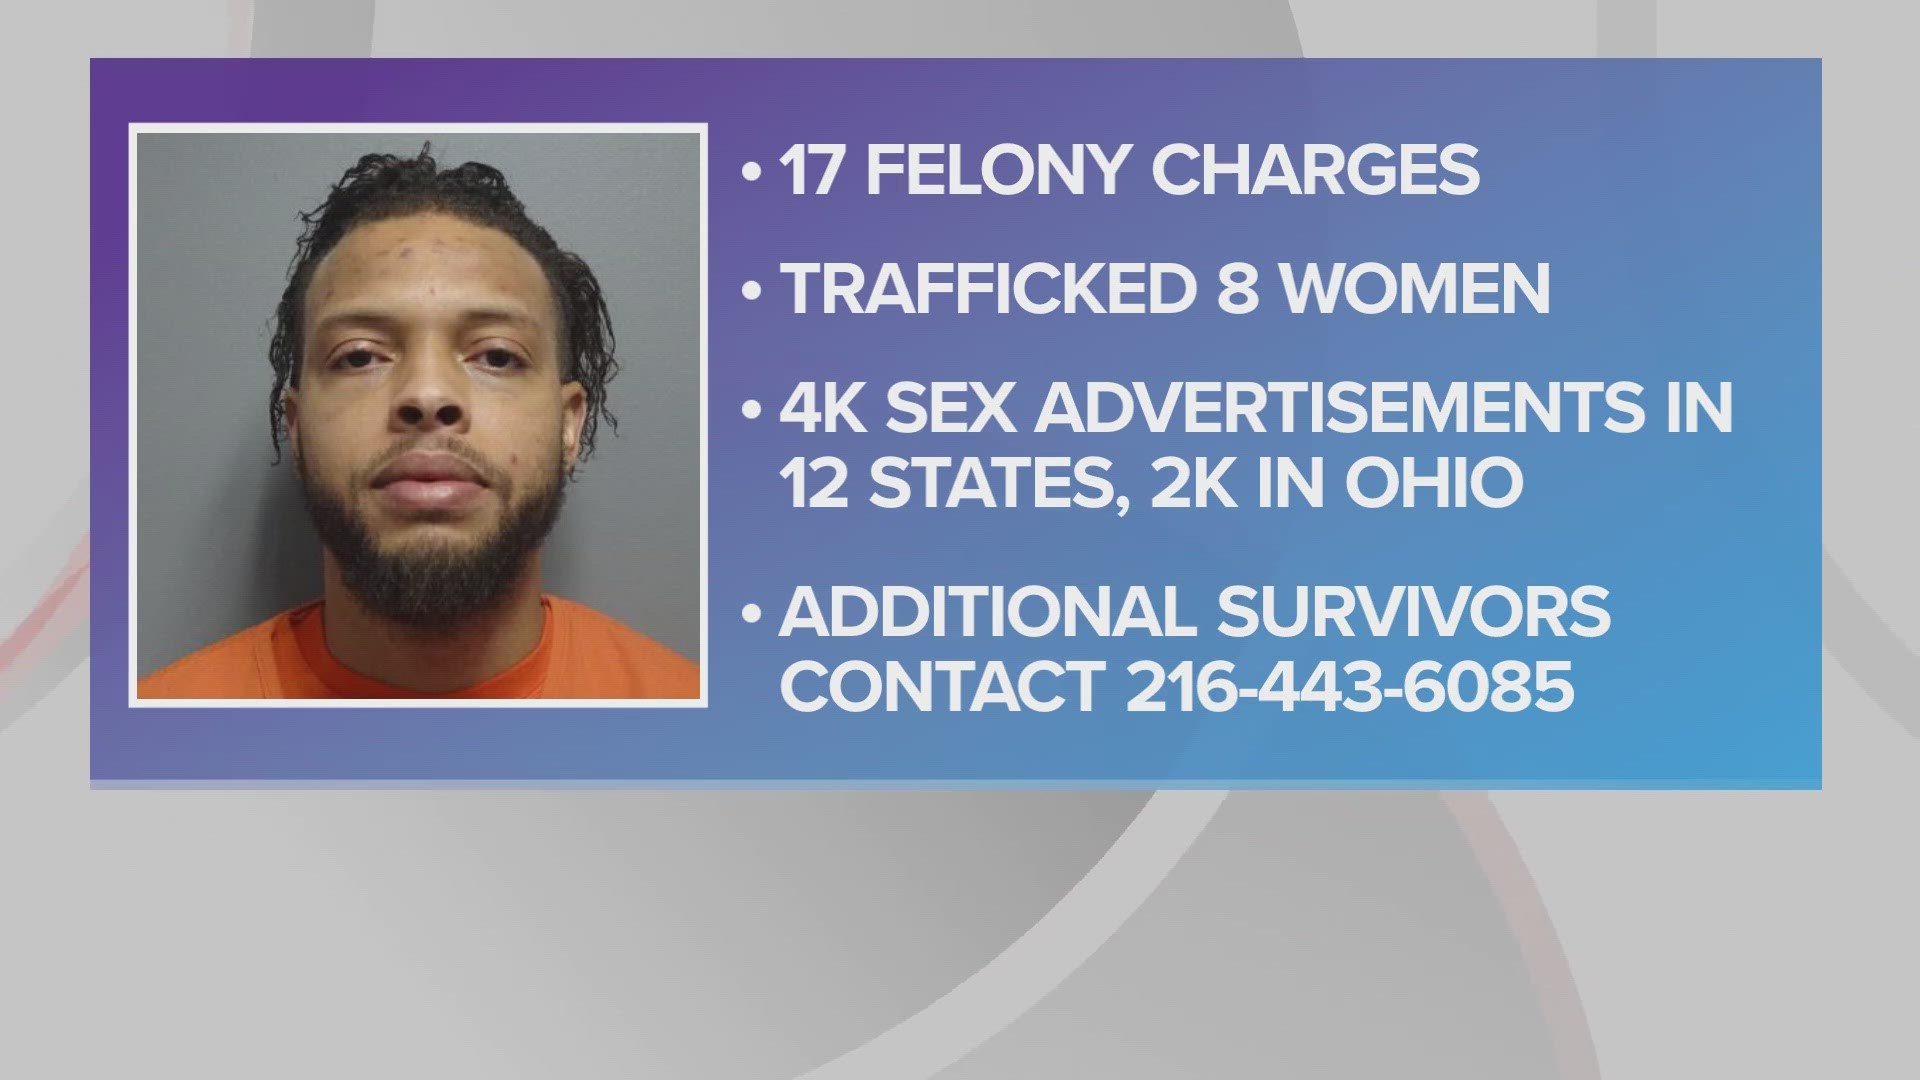 31-year-old Deondre Inkton was indicted by a Cuyahoga County grand jury on human trafficking charges.